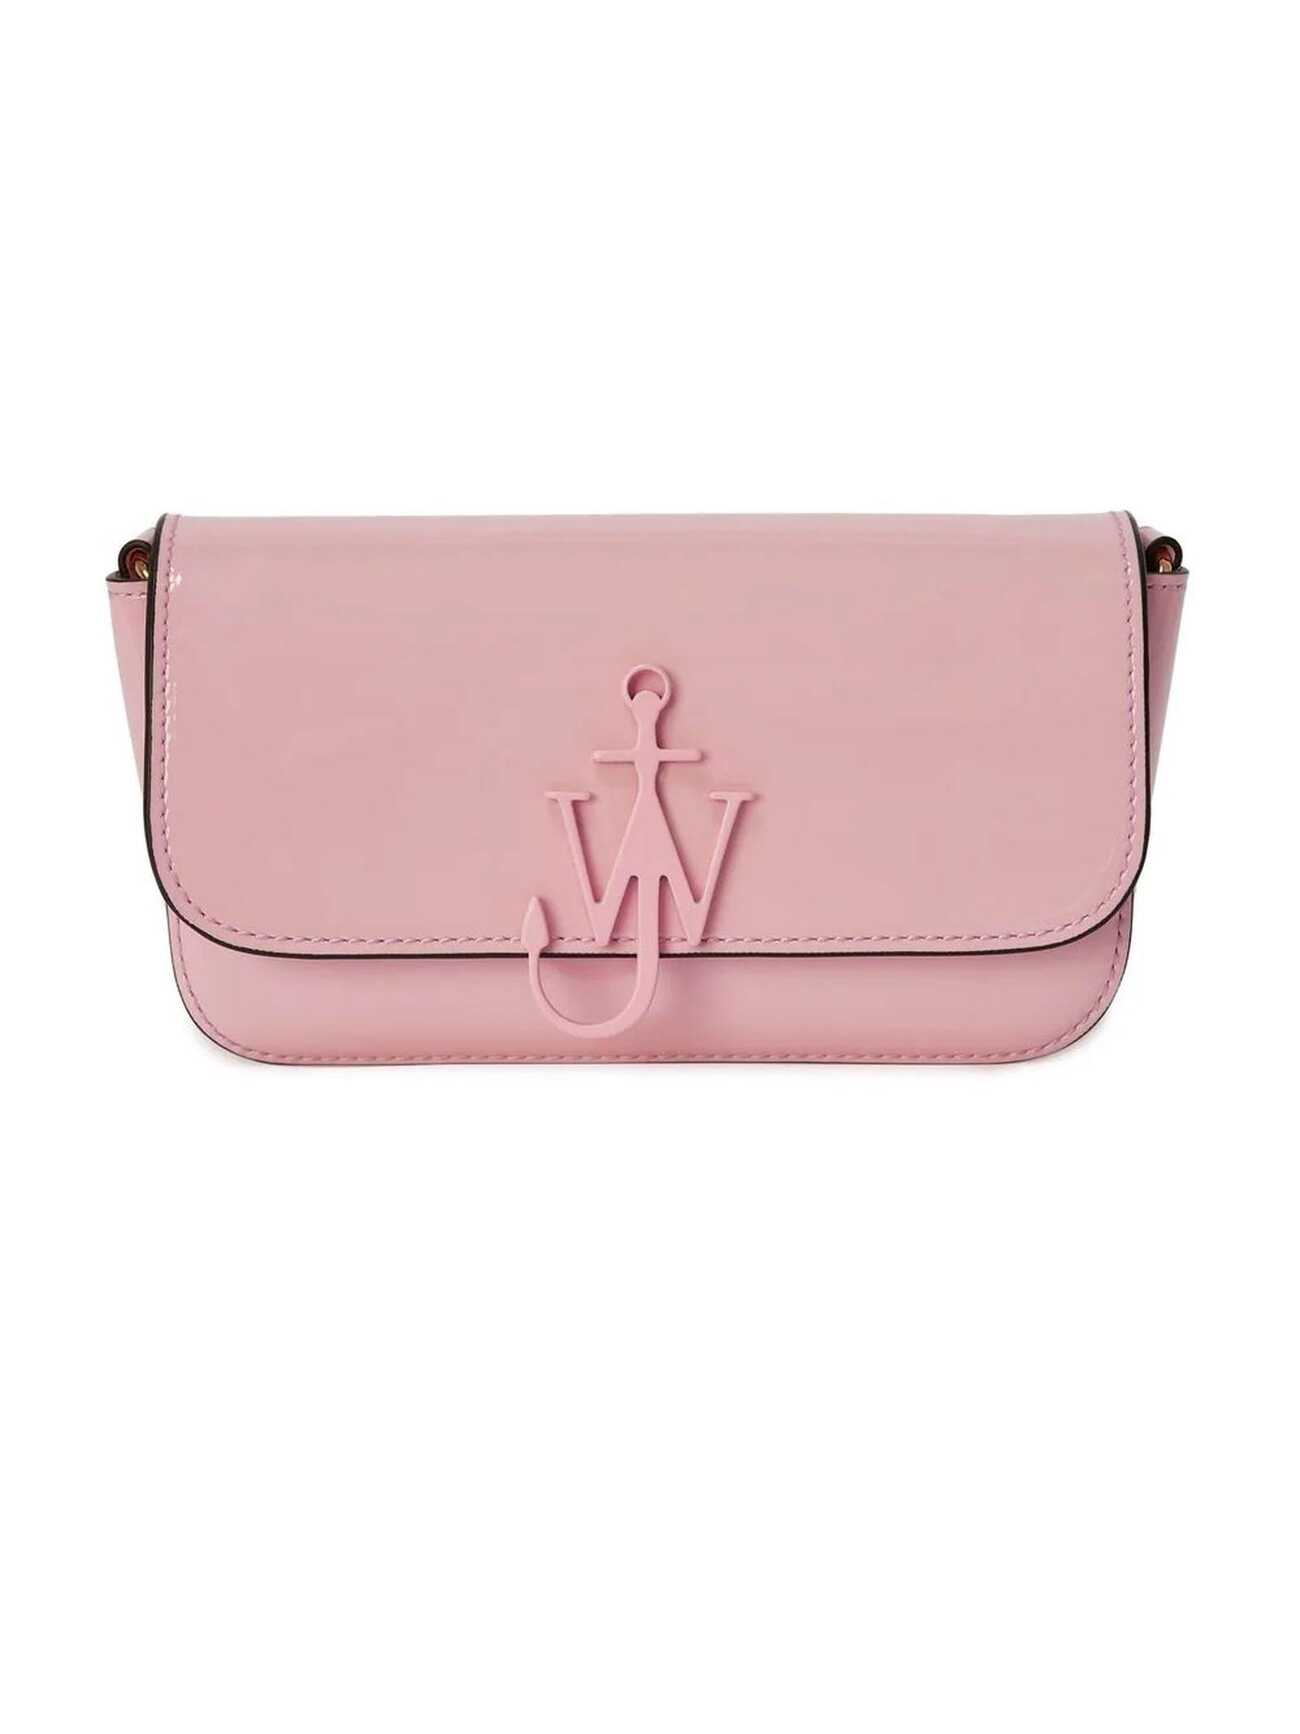 J.W. Anderson Pink Leather Baguette Bag